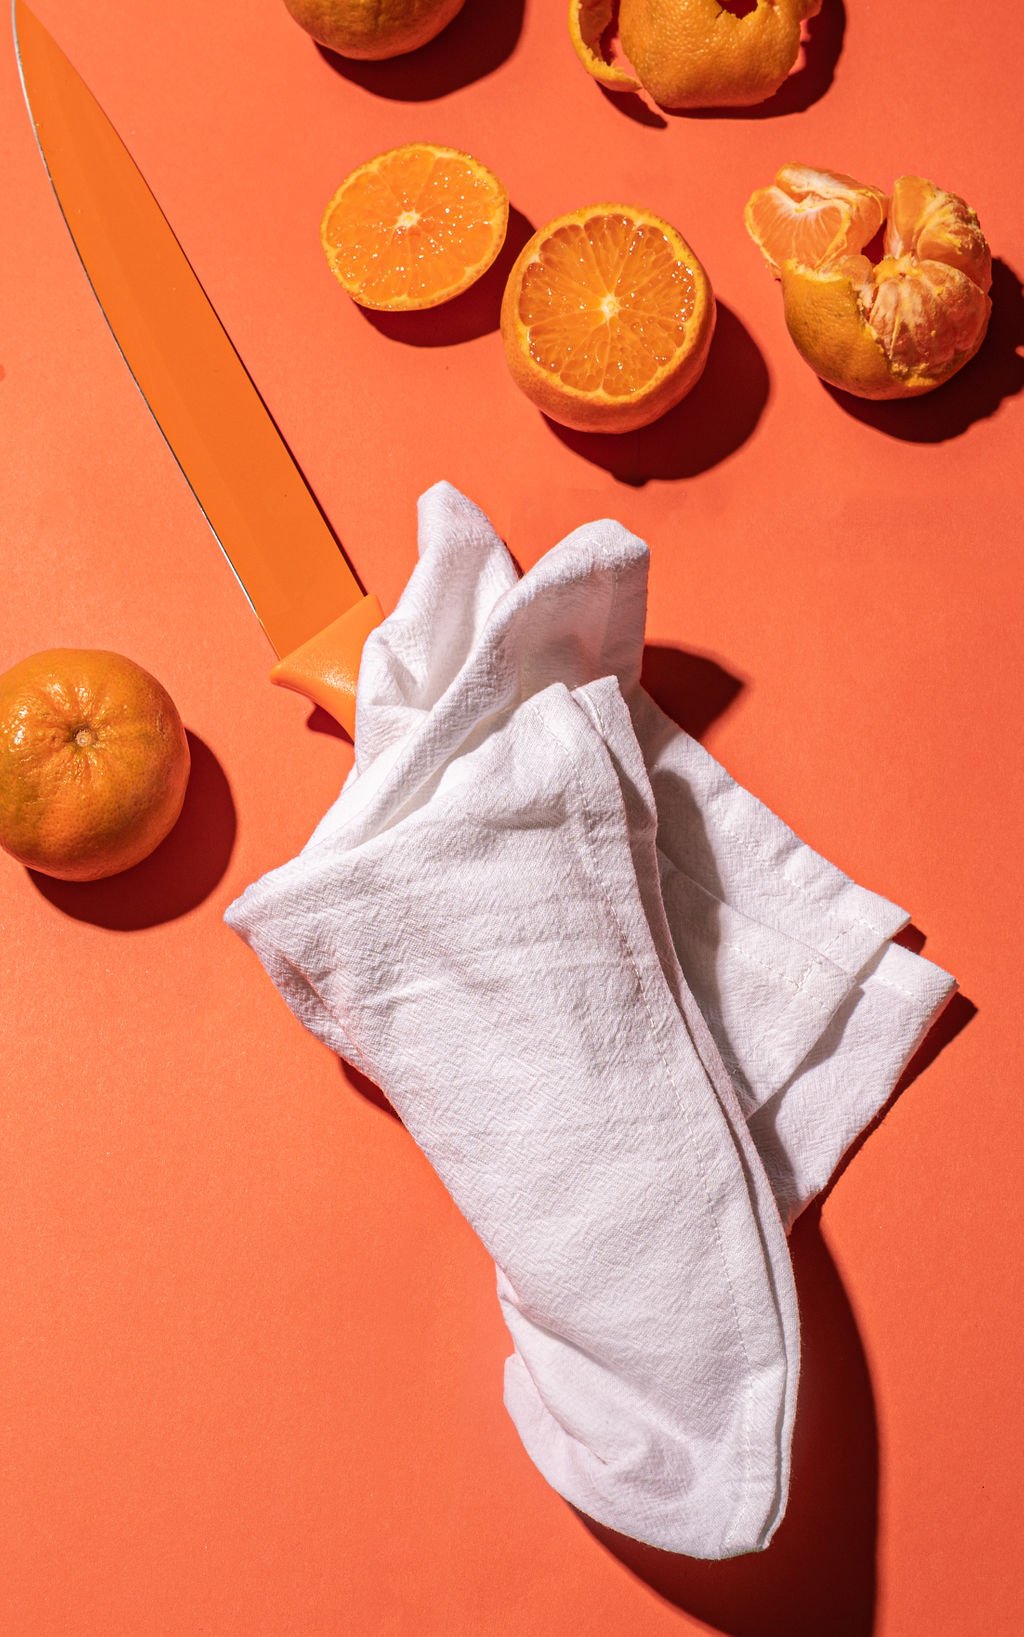 Brand photography featuring a knife, oranges, and a luxurious linen napkin on a red surface.